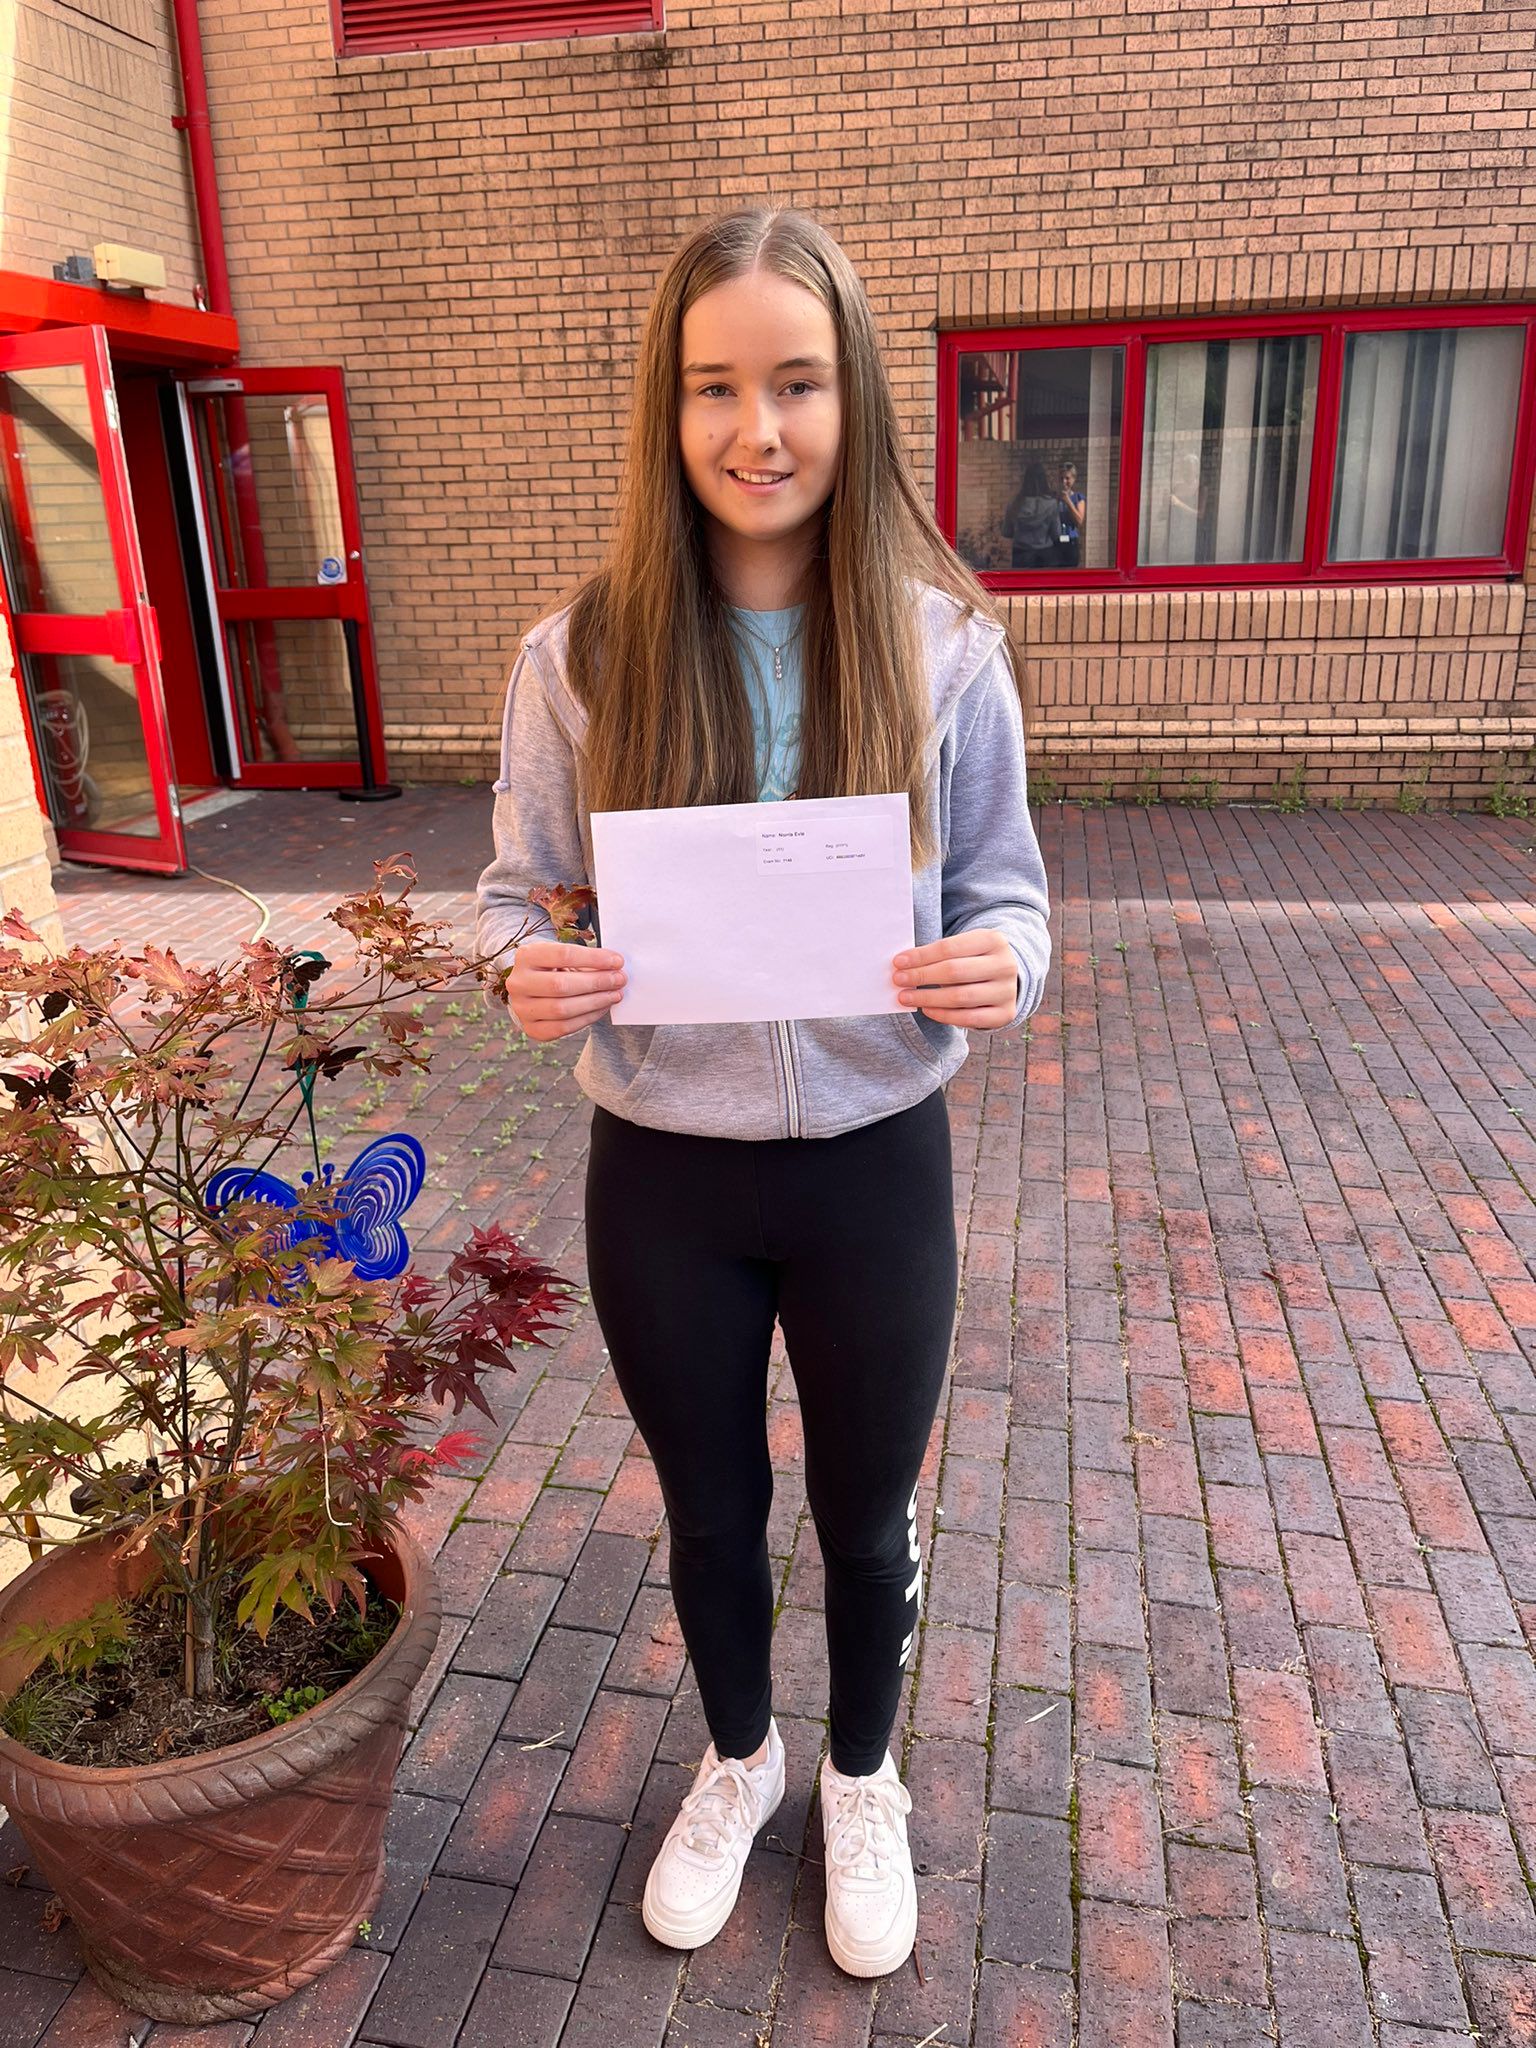 The 16-year-old pupil of Cwmtawe Community School aced her exams. (Family handout)